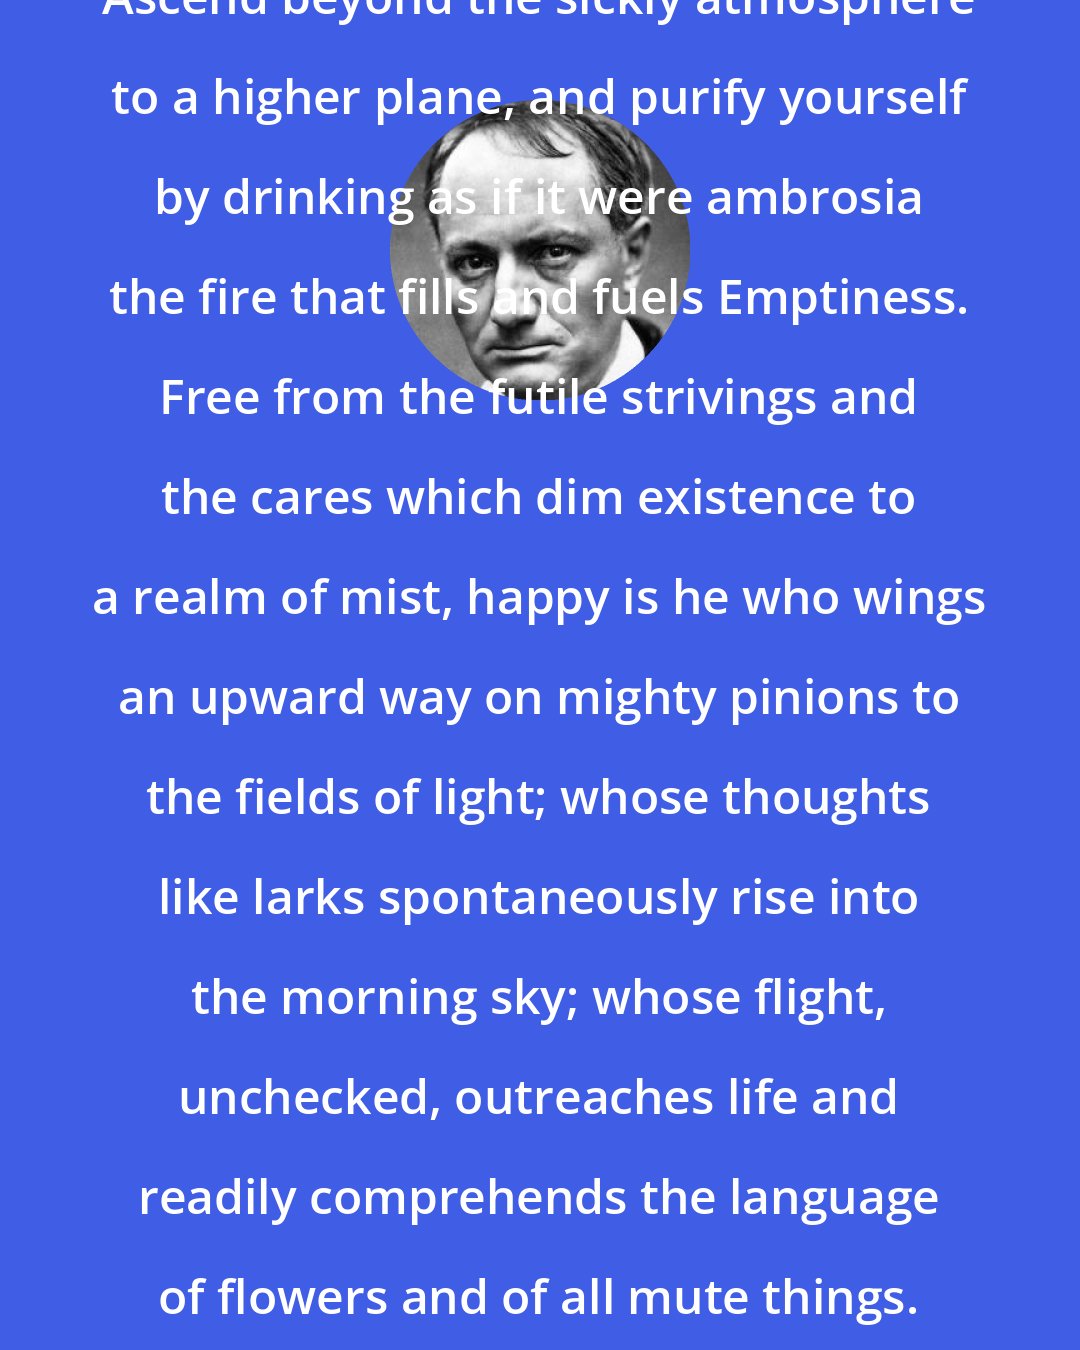 Charles Baudelaire: Ascend beyond the sickly atmosphere to a higher plane, and purify yourself by drinking as if it were ambrosia the fire that fills and fuels Emptiness. Free from the futile strivings and the cares which dim existence to a realm of mist, happy is he who wings an upward way on mighty pinions to the fields of light; whose thoughts like larks spontaneously rise into the morning sky; whose flight, unchecked, outreaches life and readily comprehends the language of flowers and of all mute things.